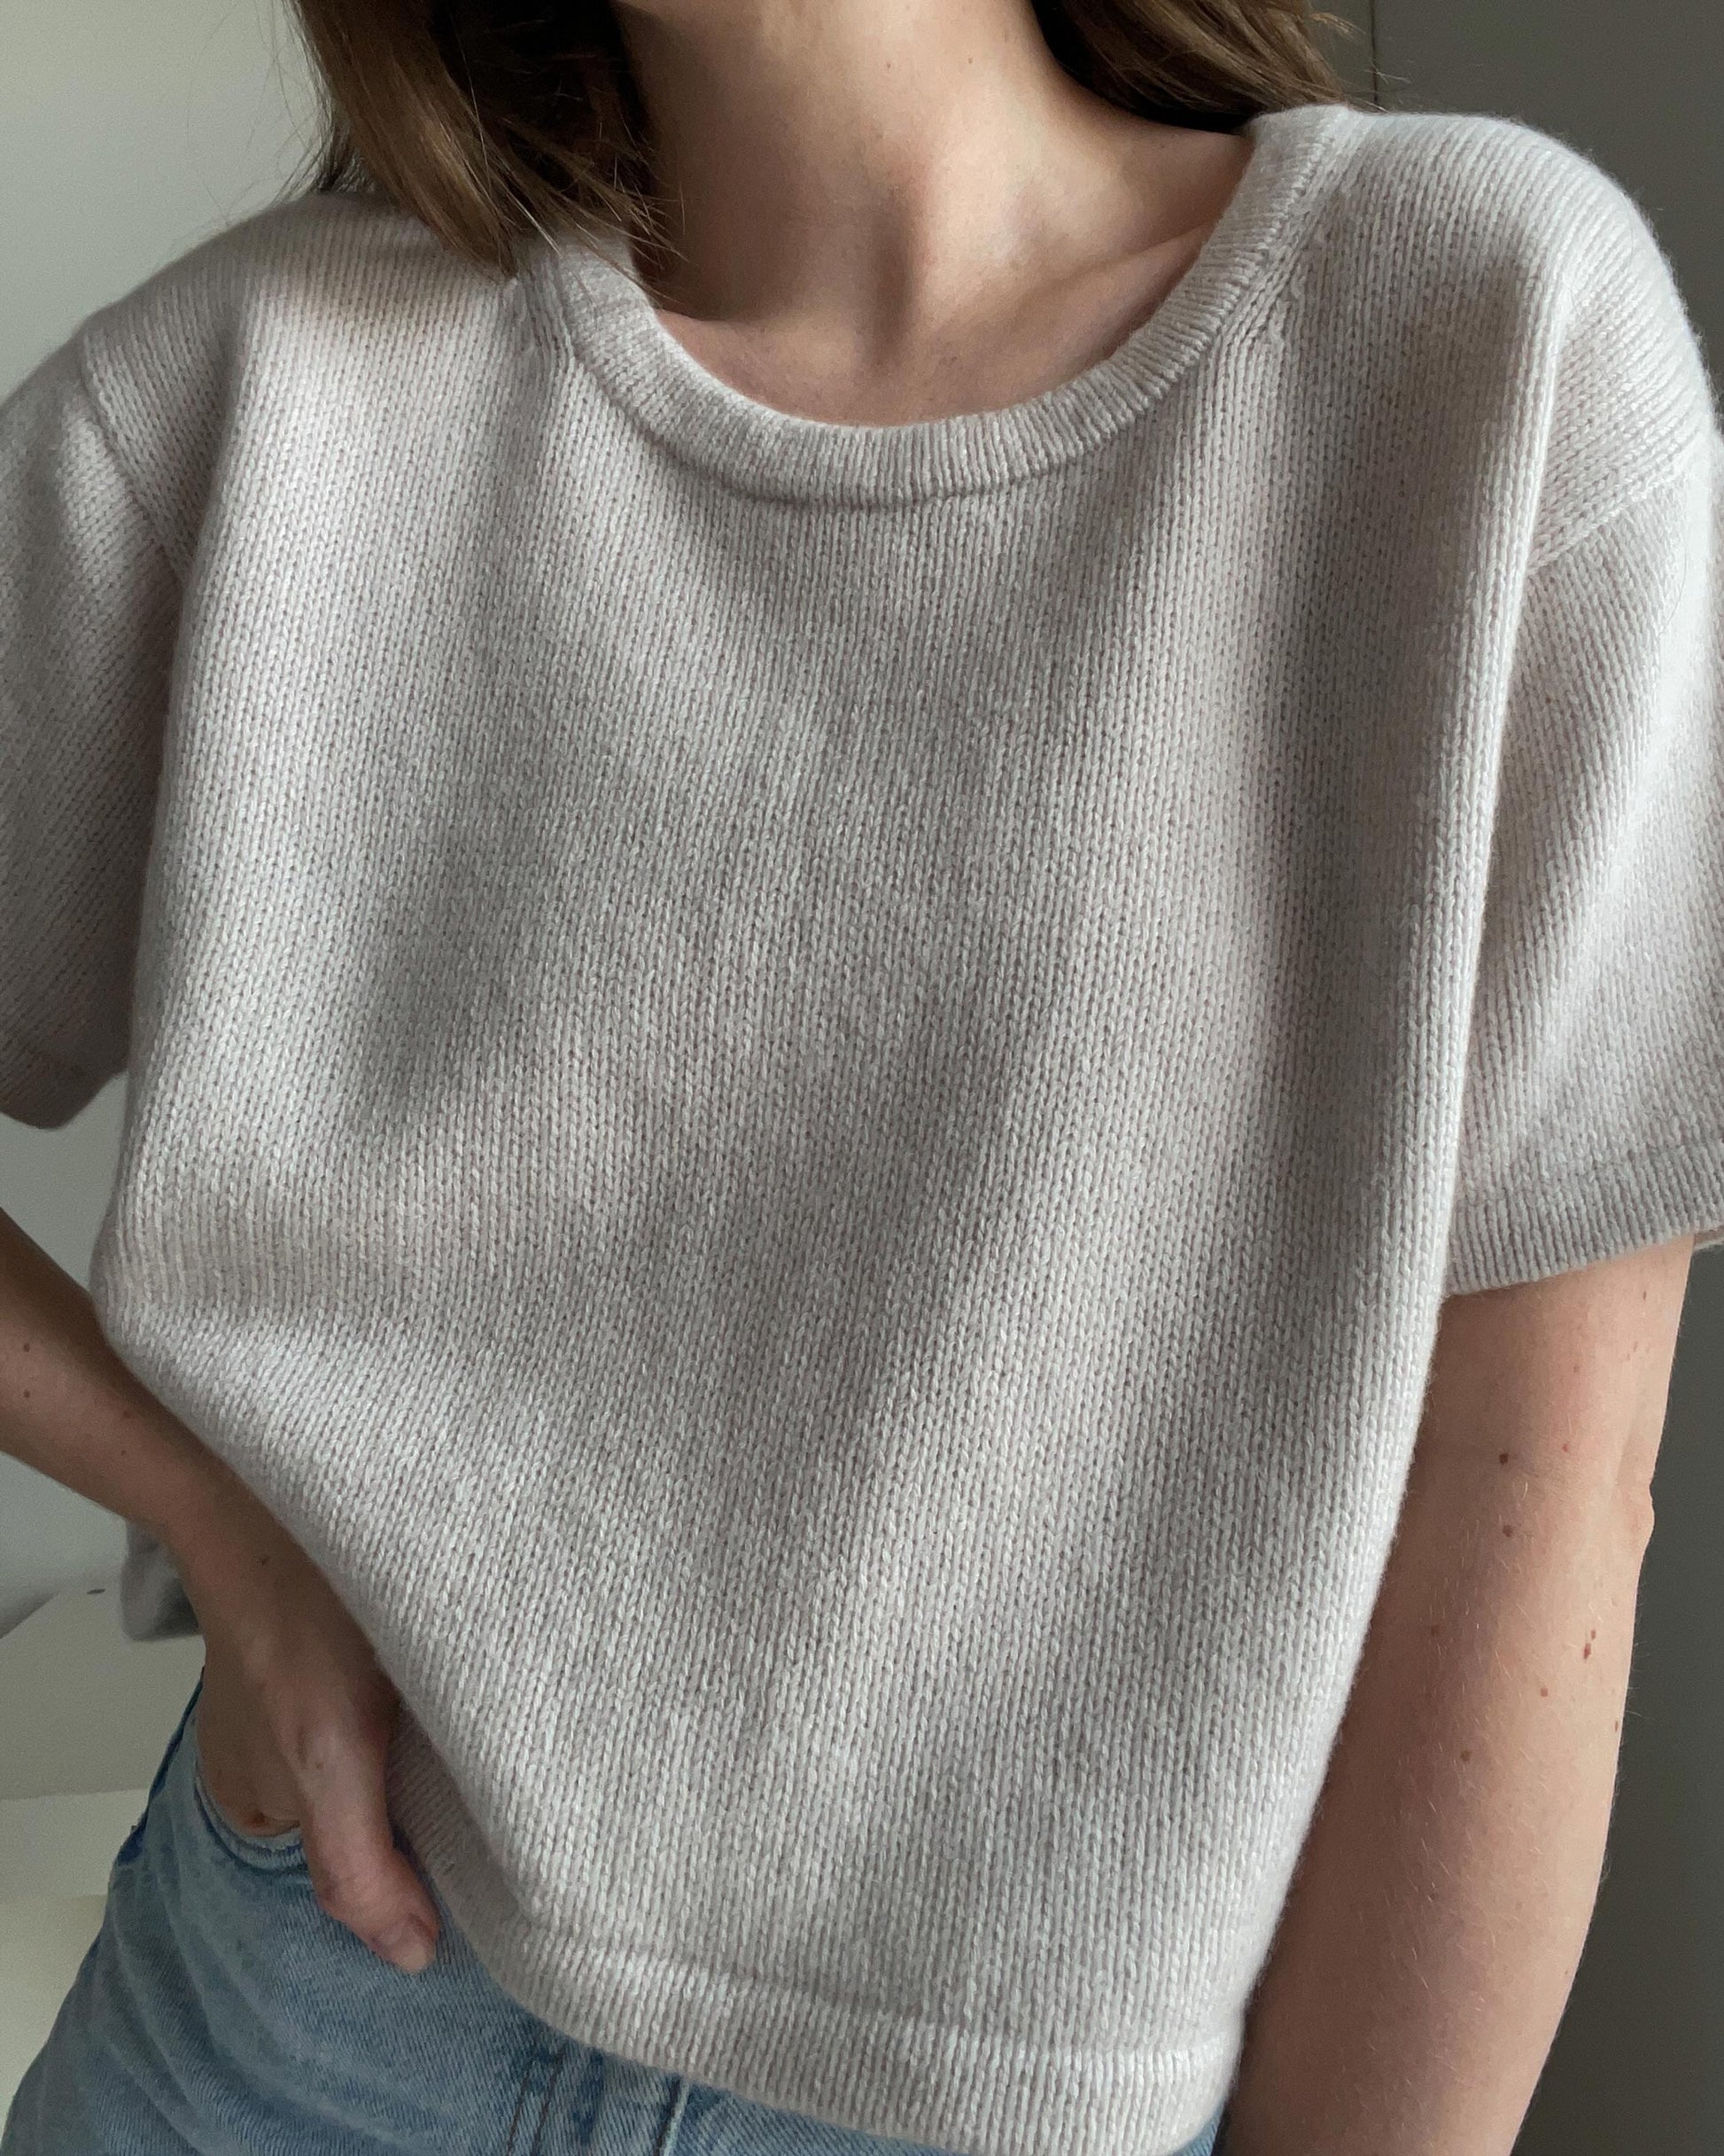 MorecaKnit's T-shirt knitting pattern, featuring a comfortable loose fit design